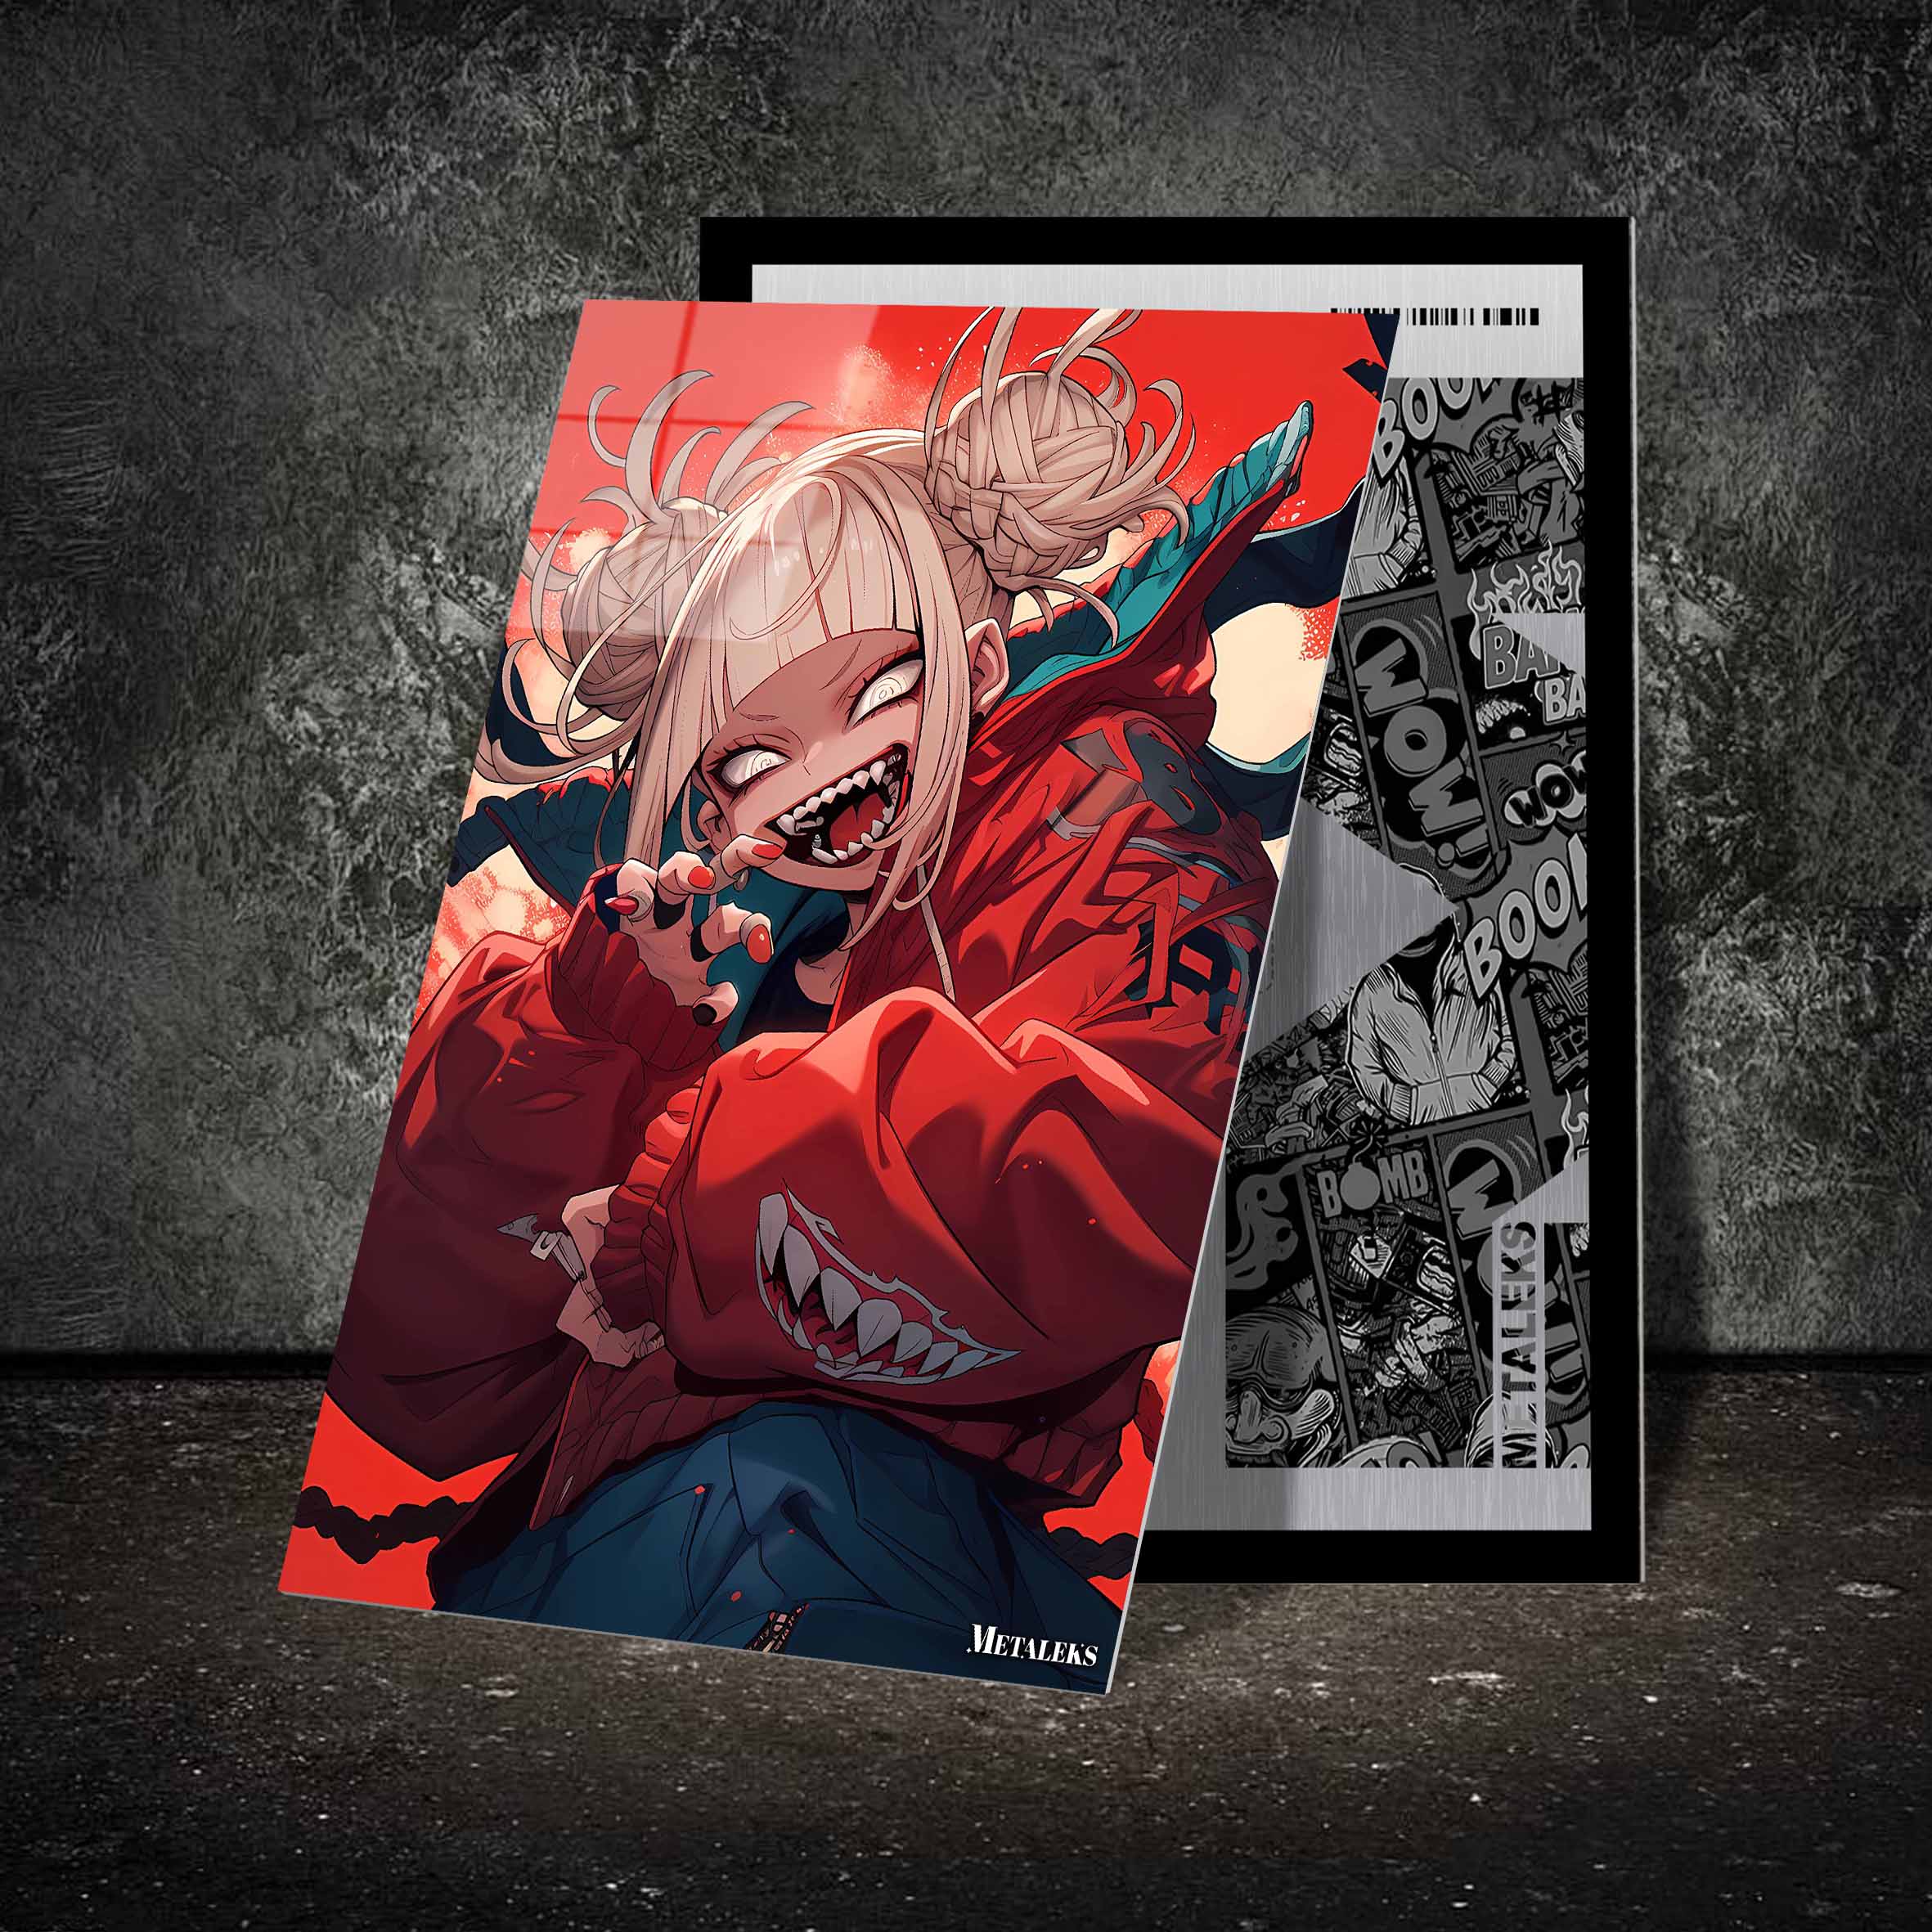 Himiko Toga Evil-designed by @Swee_Tiart